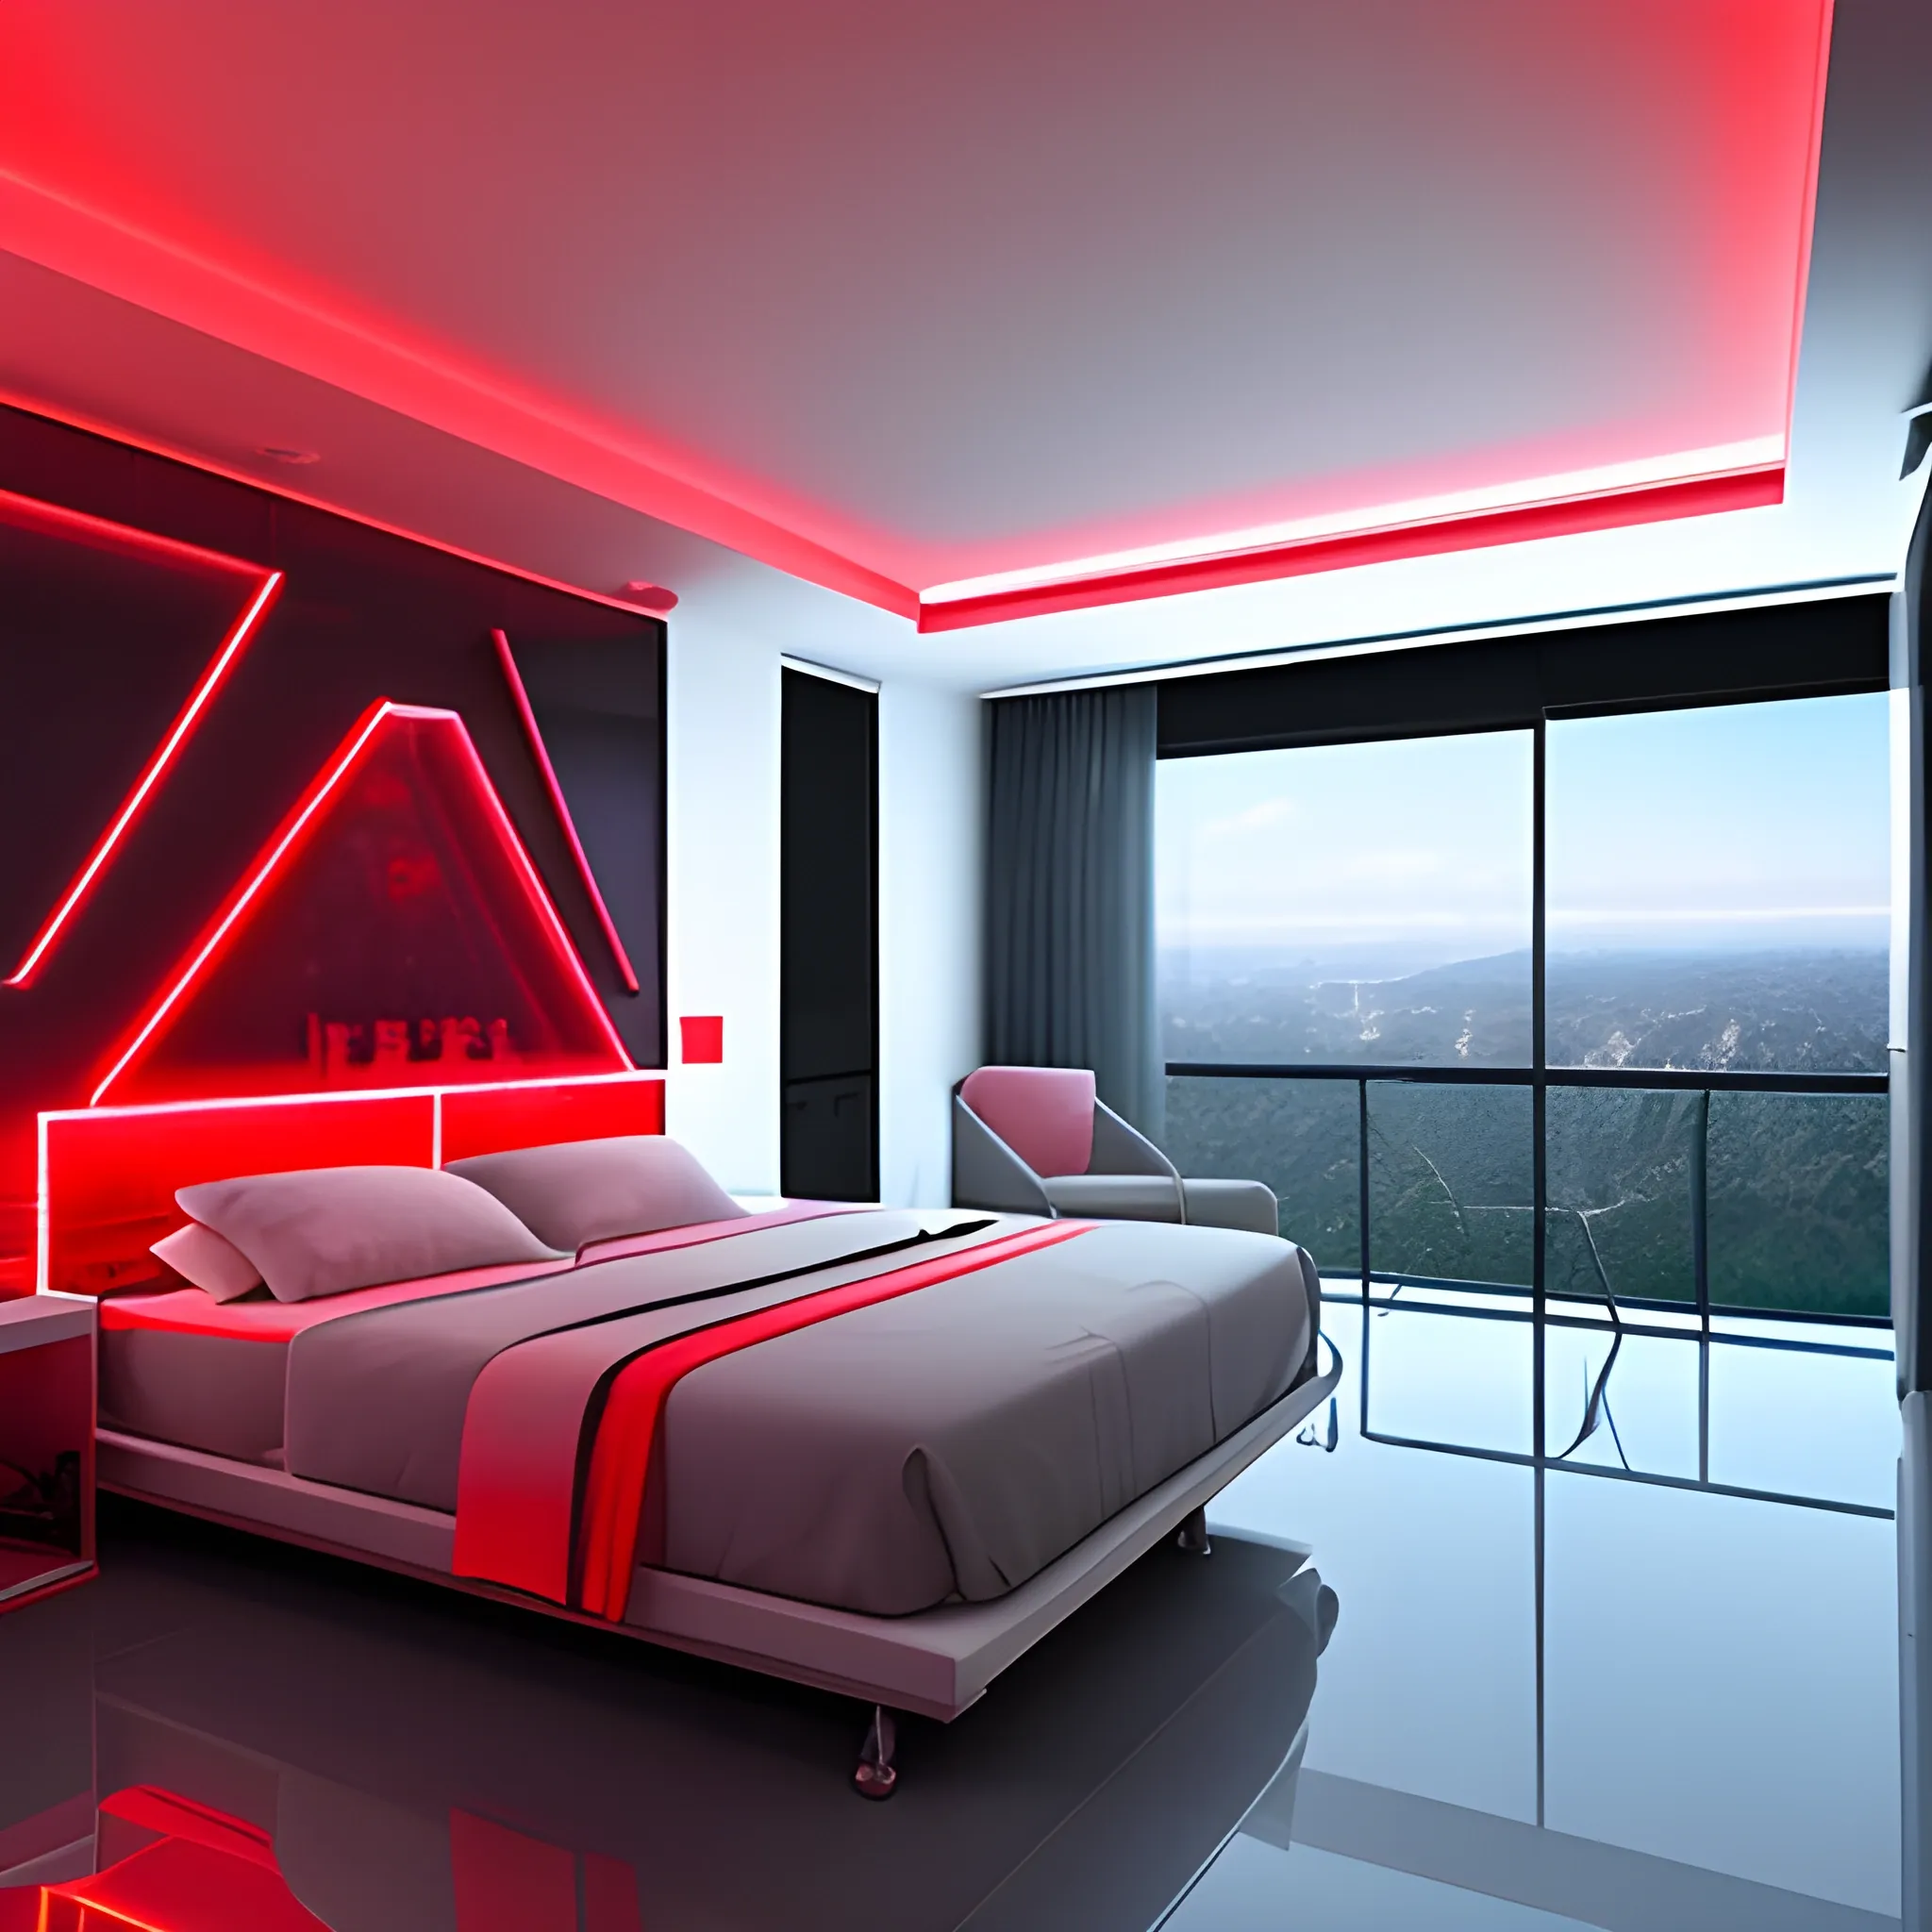 room with one of the 4 walls made of cristal that show a natural view, 3D, with bed, gray floor, with a setup, with red neon lights 